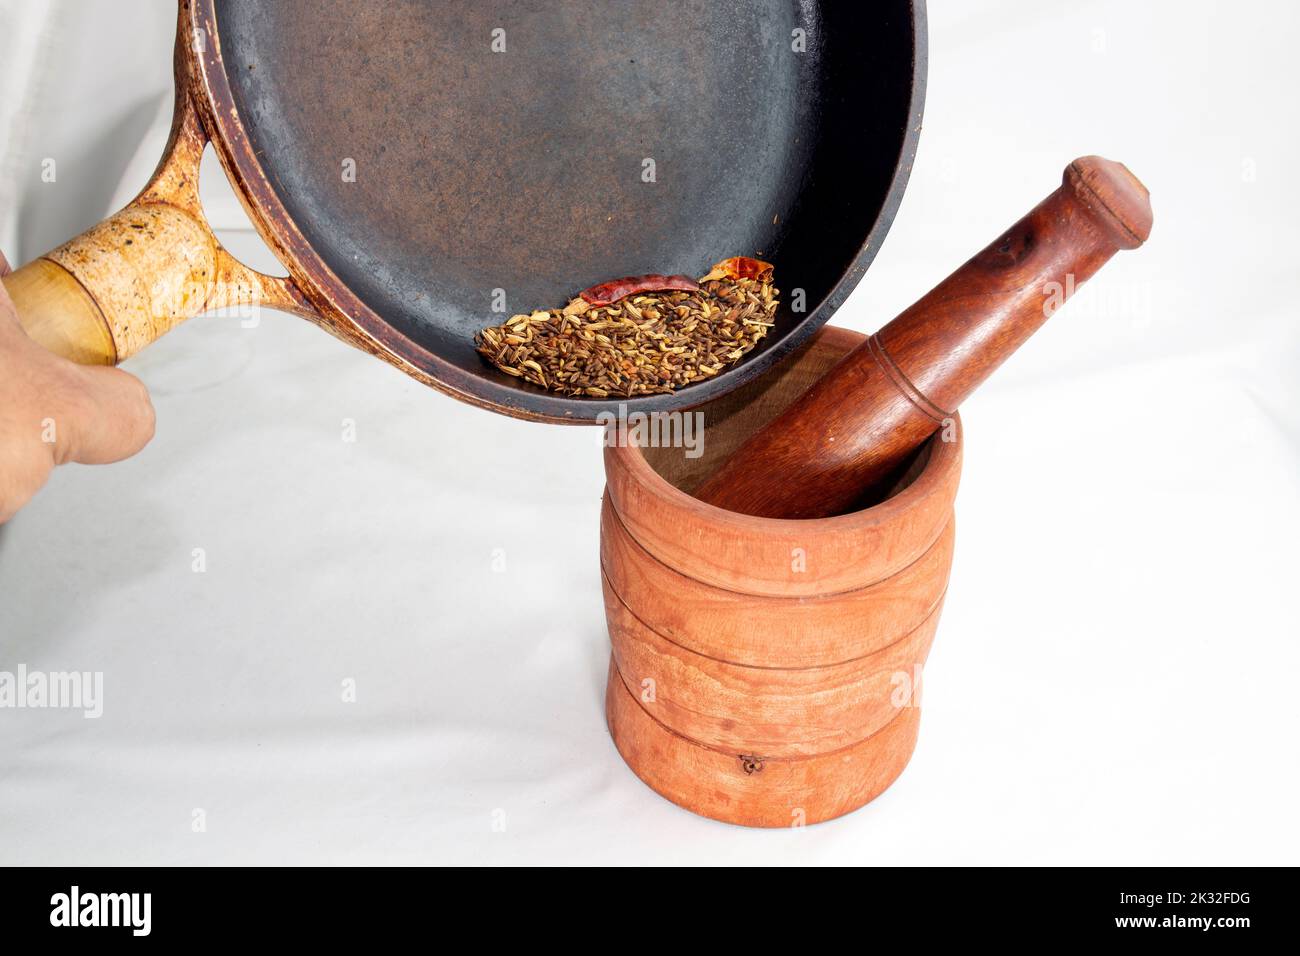 heated five spices pouring into wooden grinder to crash it for cooking. Asian traditional handmade spice powder for adding best flavour to cooking. Stock Photo